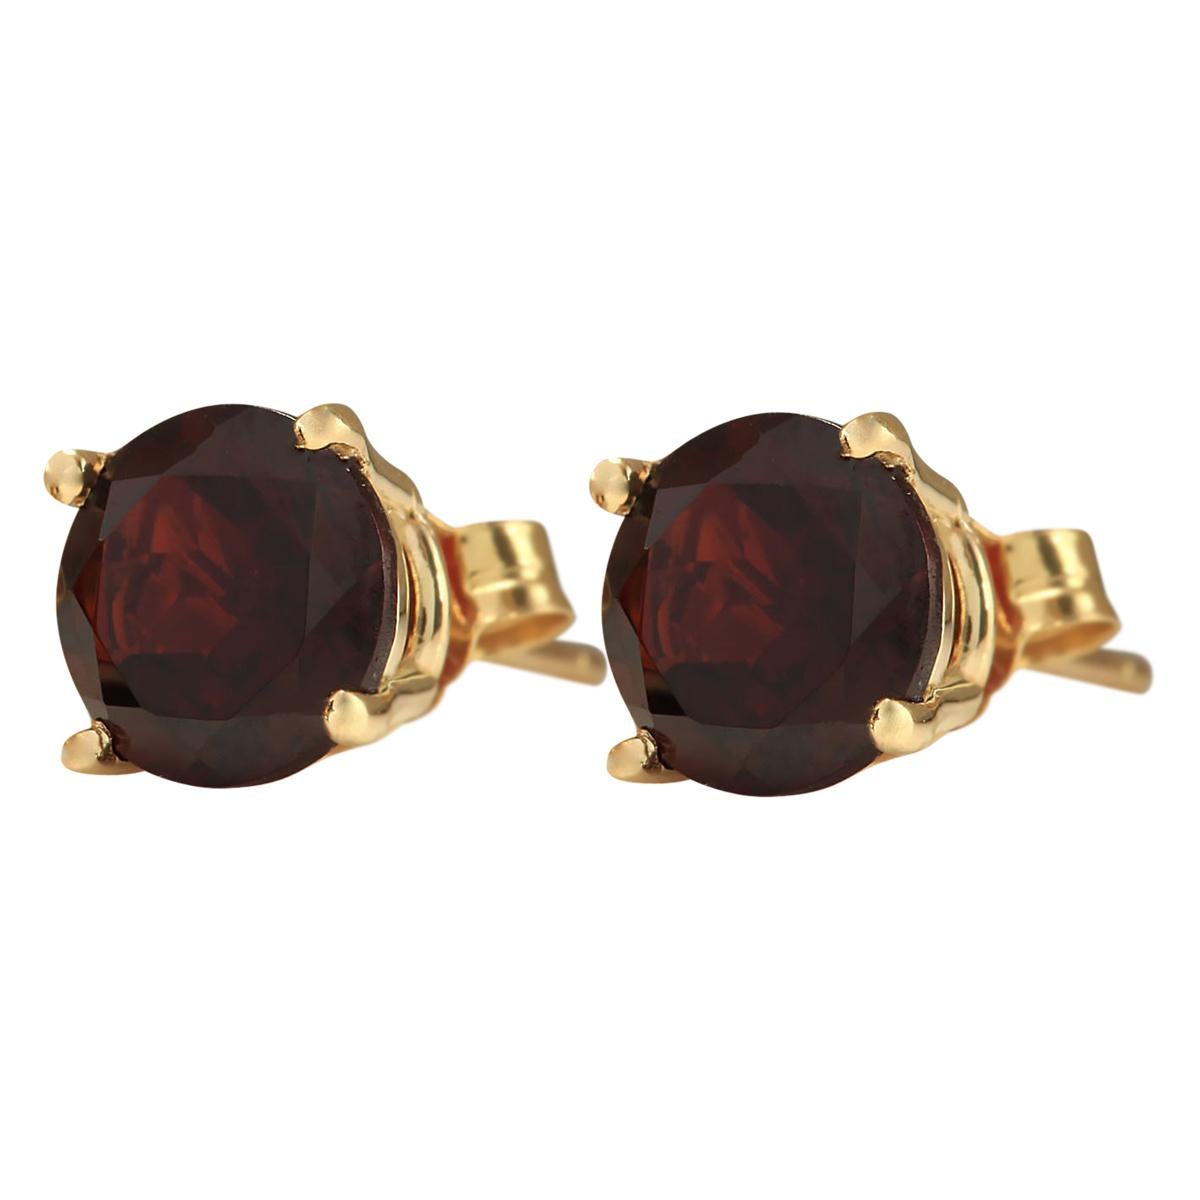 Stamped: 14K Yellow Gold
Total Earrings Weight: 1.2 Grams
Gemstone Weight: Total Natural Garnet Weight is 3.00 Carat 
Color: Red
Face Measures: 7.00x7.00 mm
Sku: [703319W]